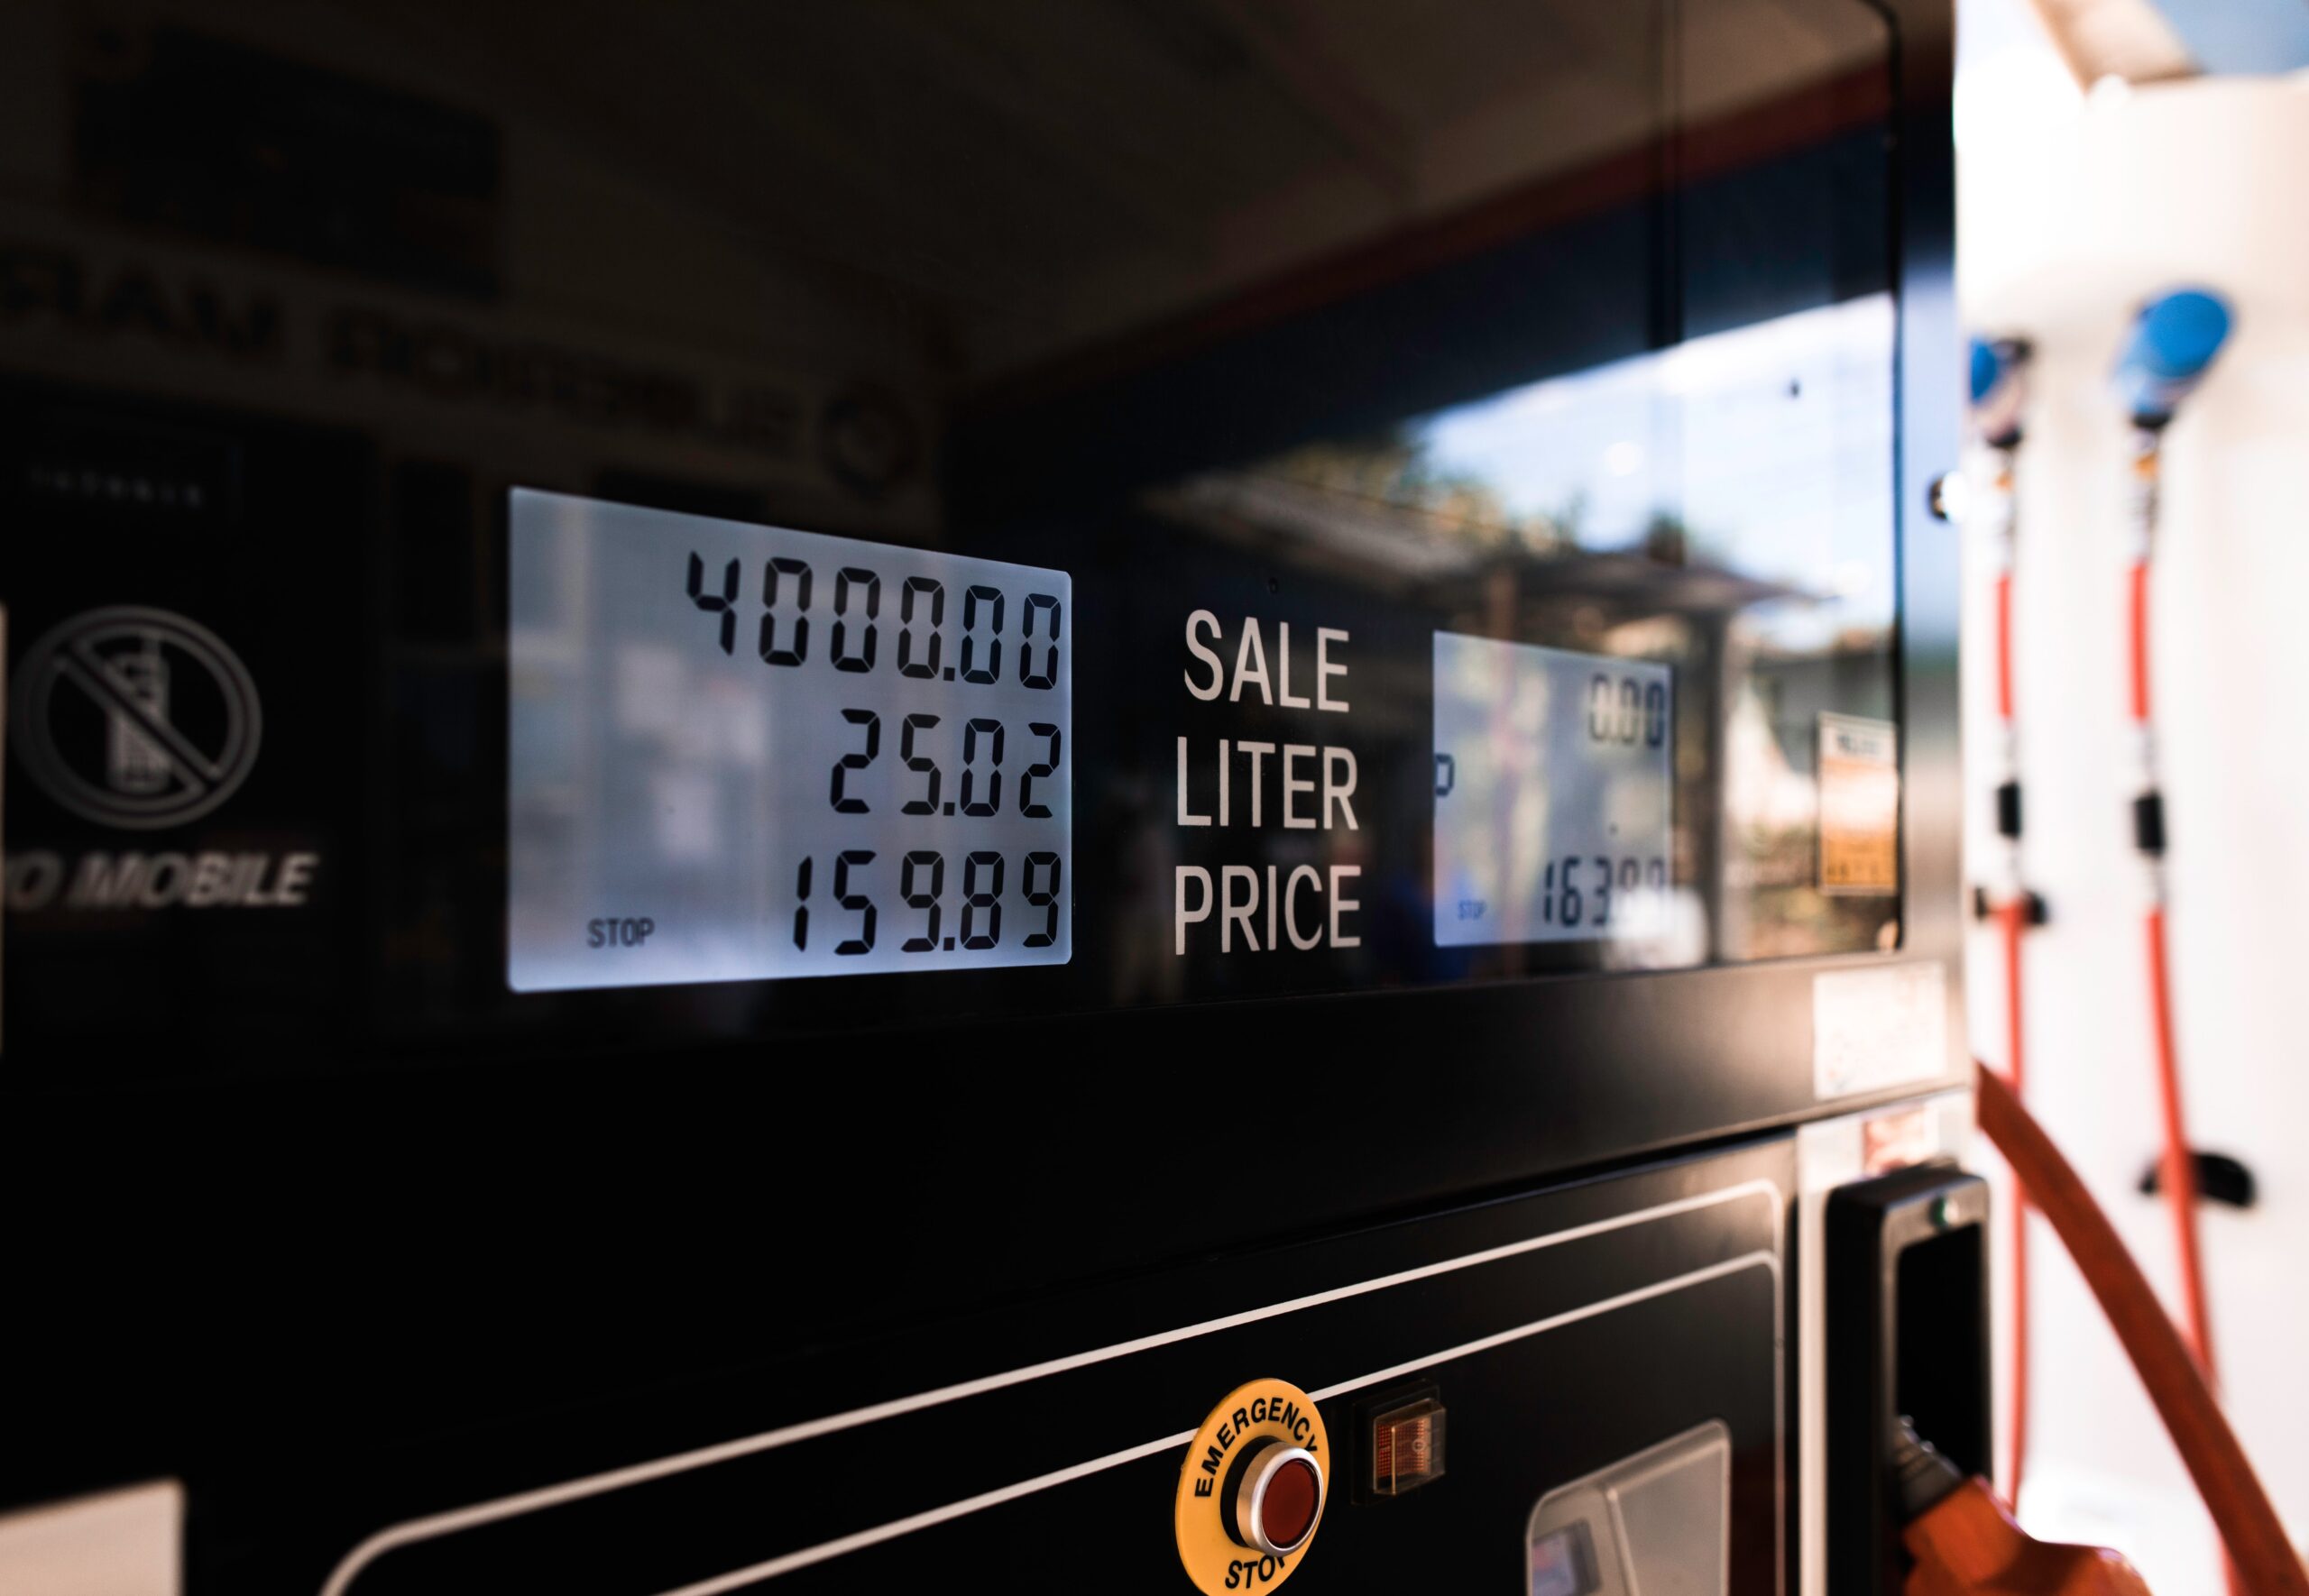 A close-up of the screen of a gas pump showing the cost of a recent sale. The numbers show the high price of 159 pence per liter of gas.